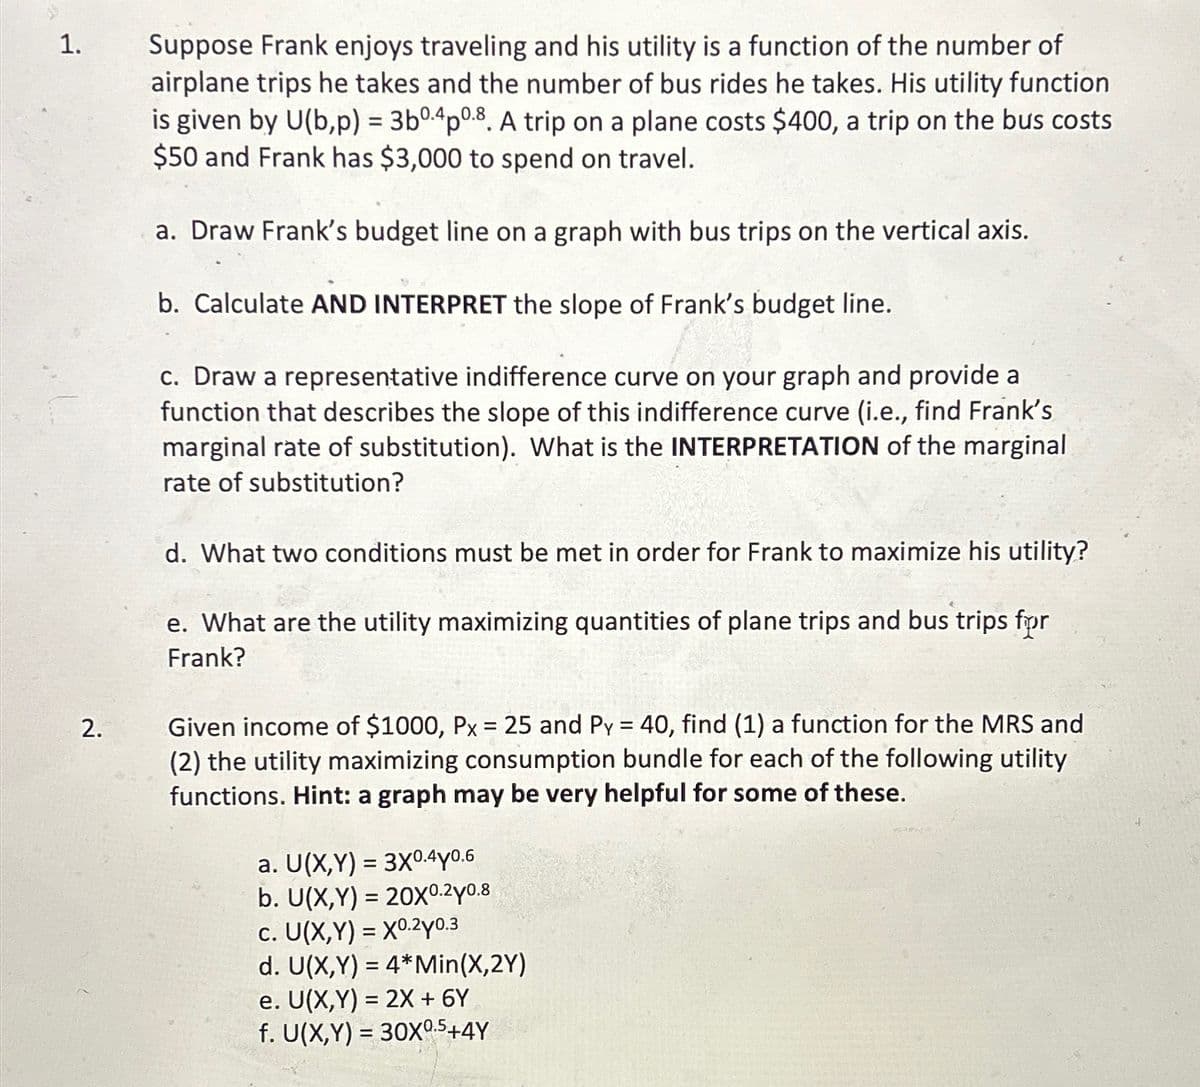 1.
2.
Suppose Frank enjoys traveling and his utility is a function of the number of
airplane trips he takes and the number of bus rides he takes. His utility function
is given by U(b,p) = 3b0-4p0.8. A trip on a plane costs $400, a trip on the bus costs
$50 and Frank has $3,000 to spend on travel.
a. Draw Frank's budget line on a graph with bus trips on the vertical axis.
b. Calculate AND INTERPRET the slope of Frank's budget line.
c. Draw a representative indifference curve on your graph and provide a
function that describes the slope of this indifference curve (i.e., find Frank's
marginal rate of substitution). What is the INTERPRETATION of the marginal
rate of substitution?
d. What two conditions must be met in order for Frank to maximize his utility?
e. What are the utility maximizing quantities of plane trips and bus trips for
Frank?
Given income of $1000, Px = 25 and Py = 40, find (1) a function for the MRS and
(2) the utility maximizing consumption bundle for each of the following utility
functions. Hint: a graph may be very helpful for some of these.
a. U(X,Y)= 3X0.4Y0.6
b. U(X,Y) = 20X0.20.8
c. U(X,Y) = X0.2y0.3
d. U(X,Y)= 4*Min(X,2Y)
e. U(X,Y) = 2X + 6Y
f. U(X,Y) = 30X⁰.5+4Y